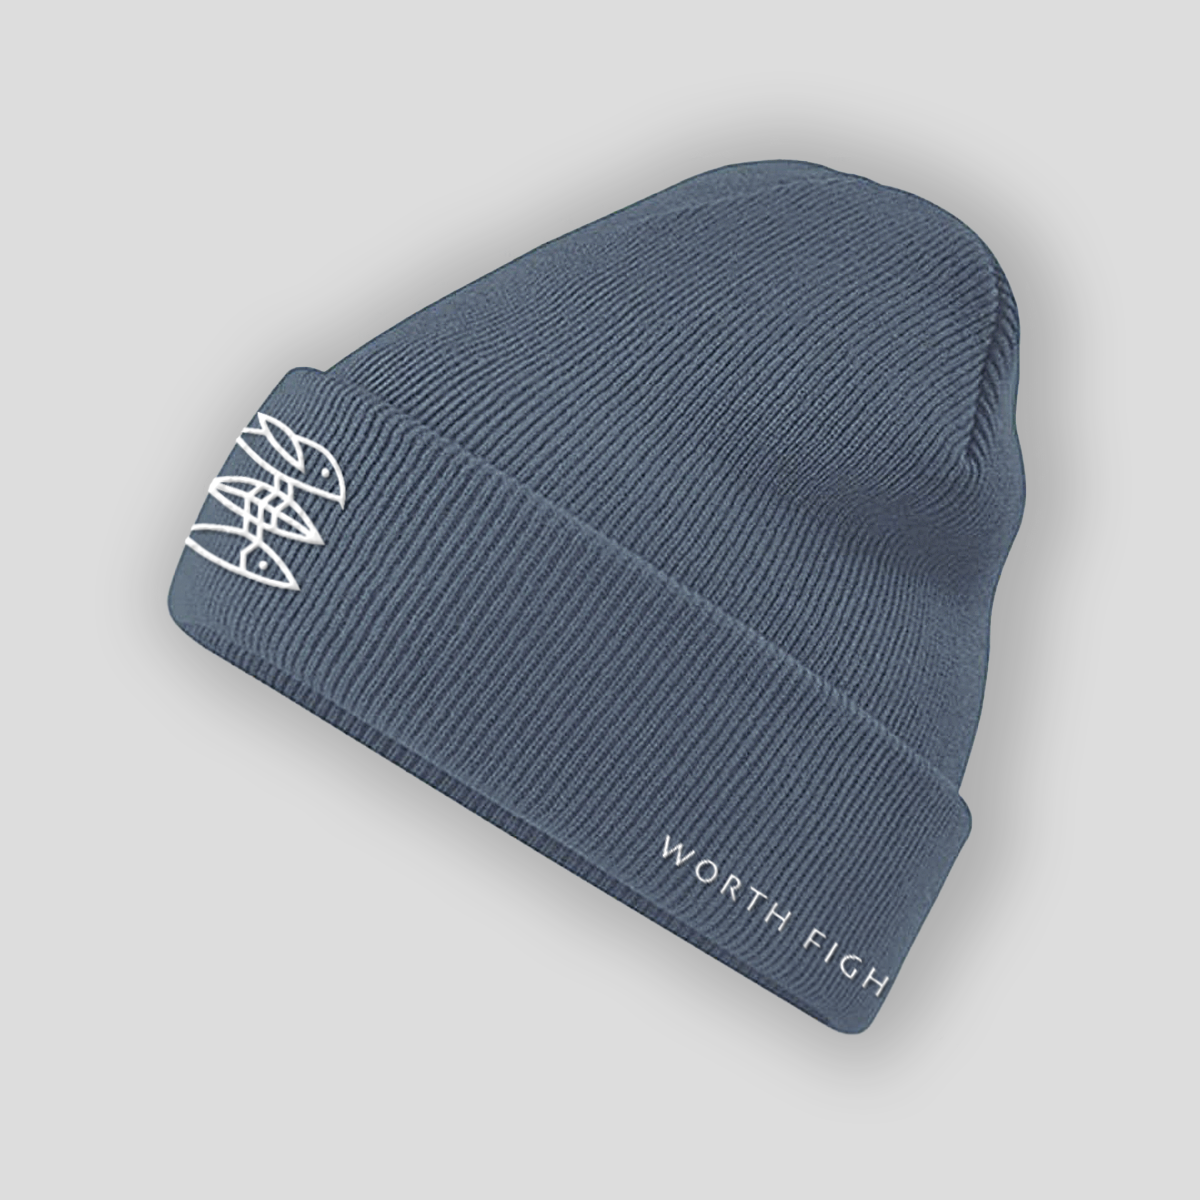 Beanie "Worth fighting for" Ocean Blue